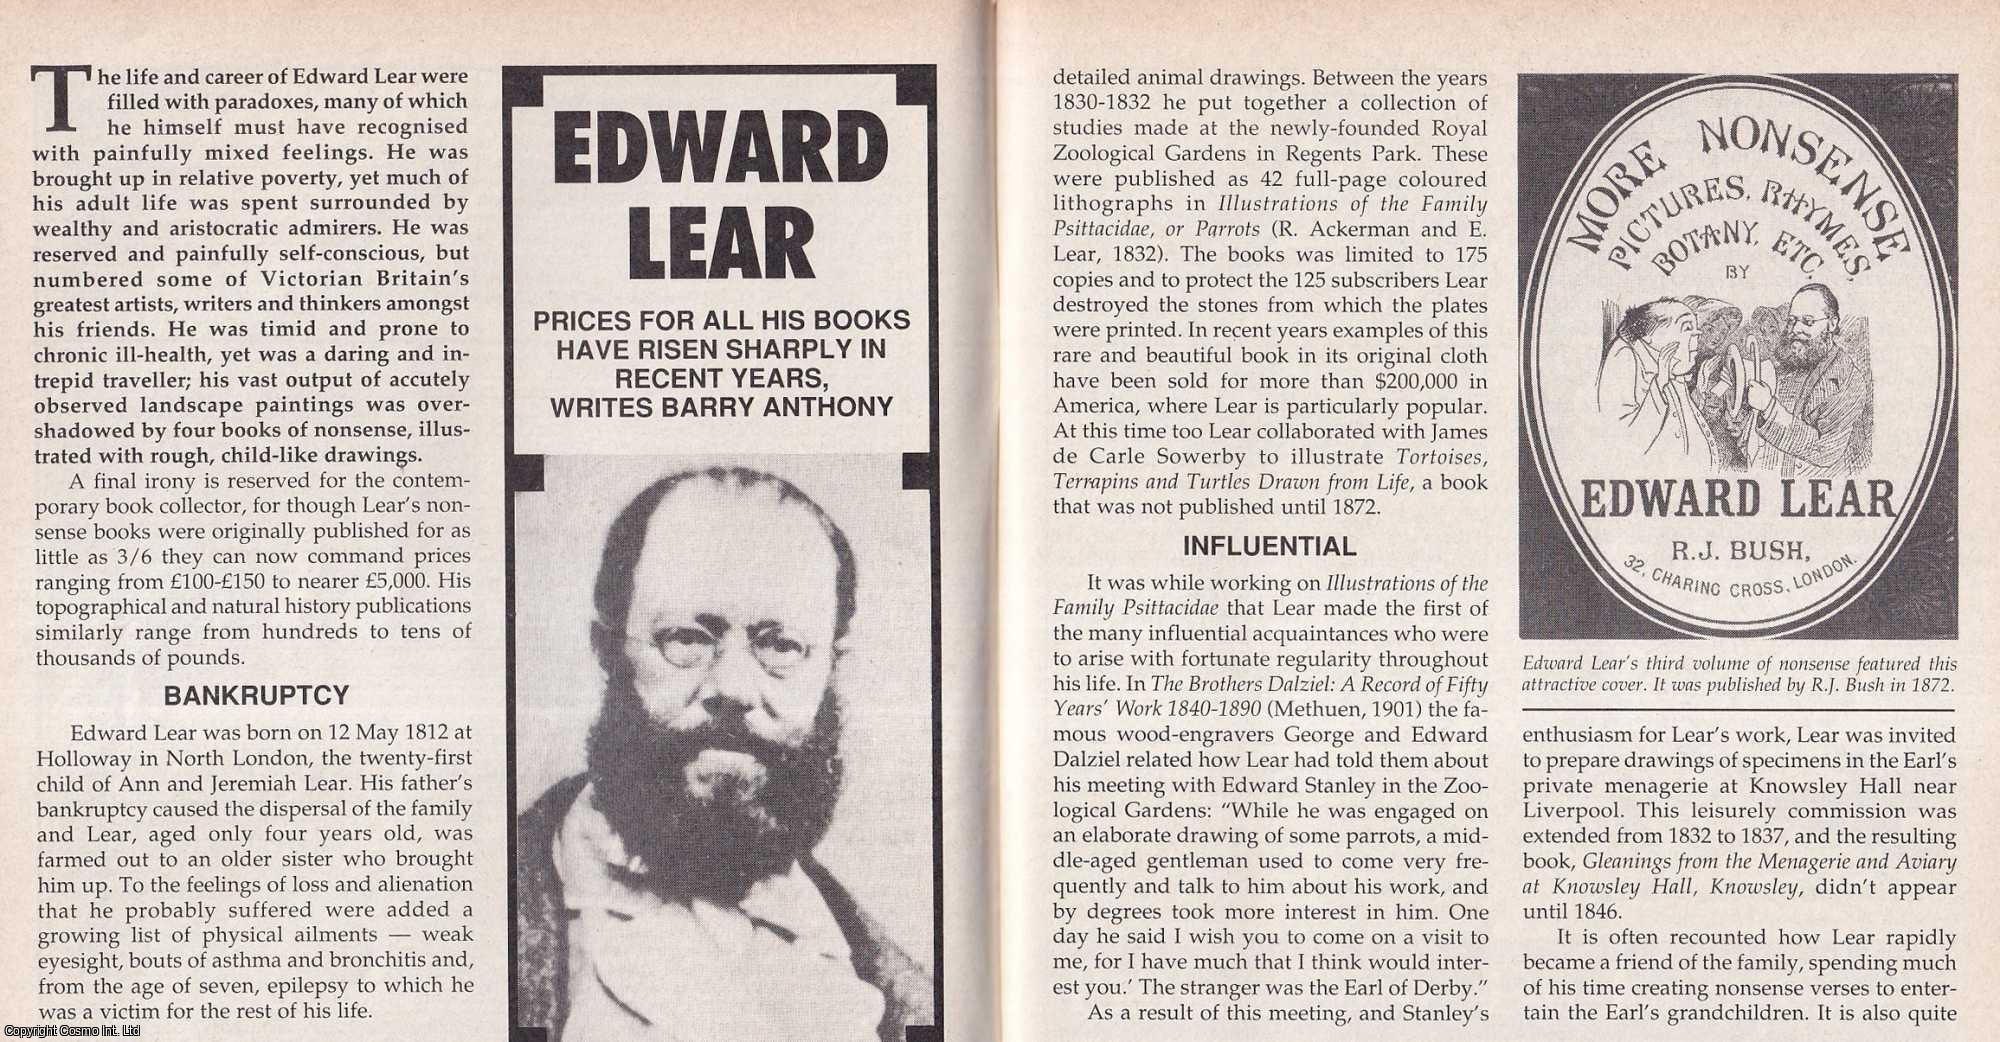 Barry Anthony - Edward Lear : His collectable books. This is an original article separated from an issue of The Book & Magazine Collector publication, 1991.